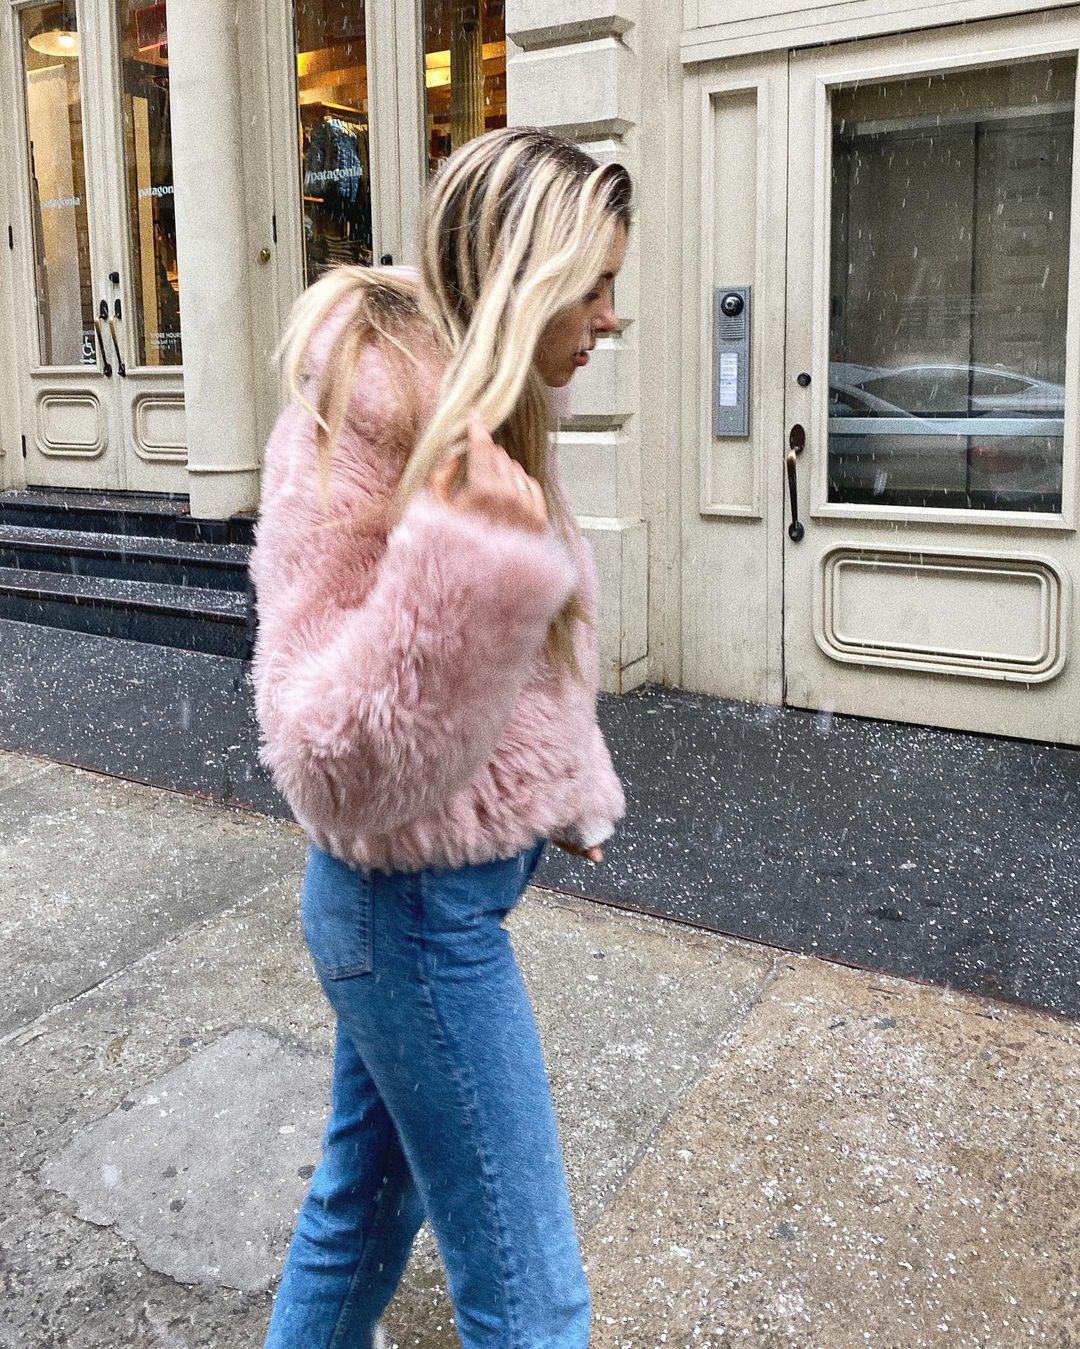 15 Faux Fur Jacket Outfits Will Never, How To Wear A Long Fur Coat With Jeans